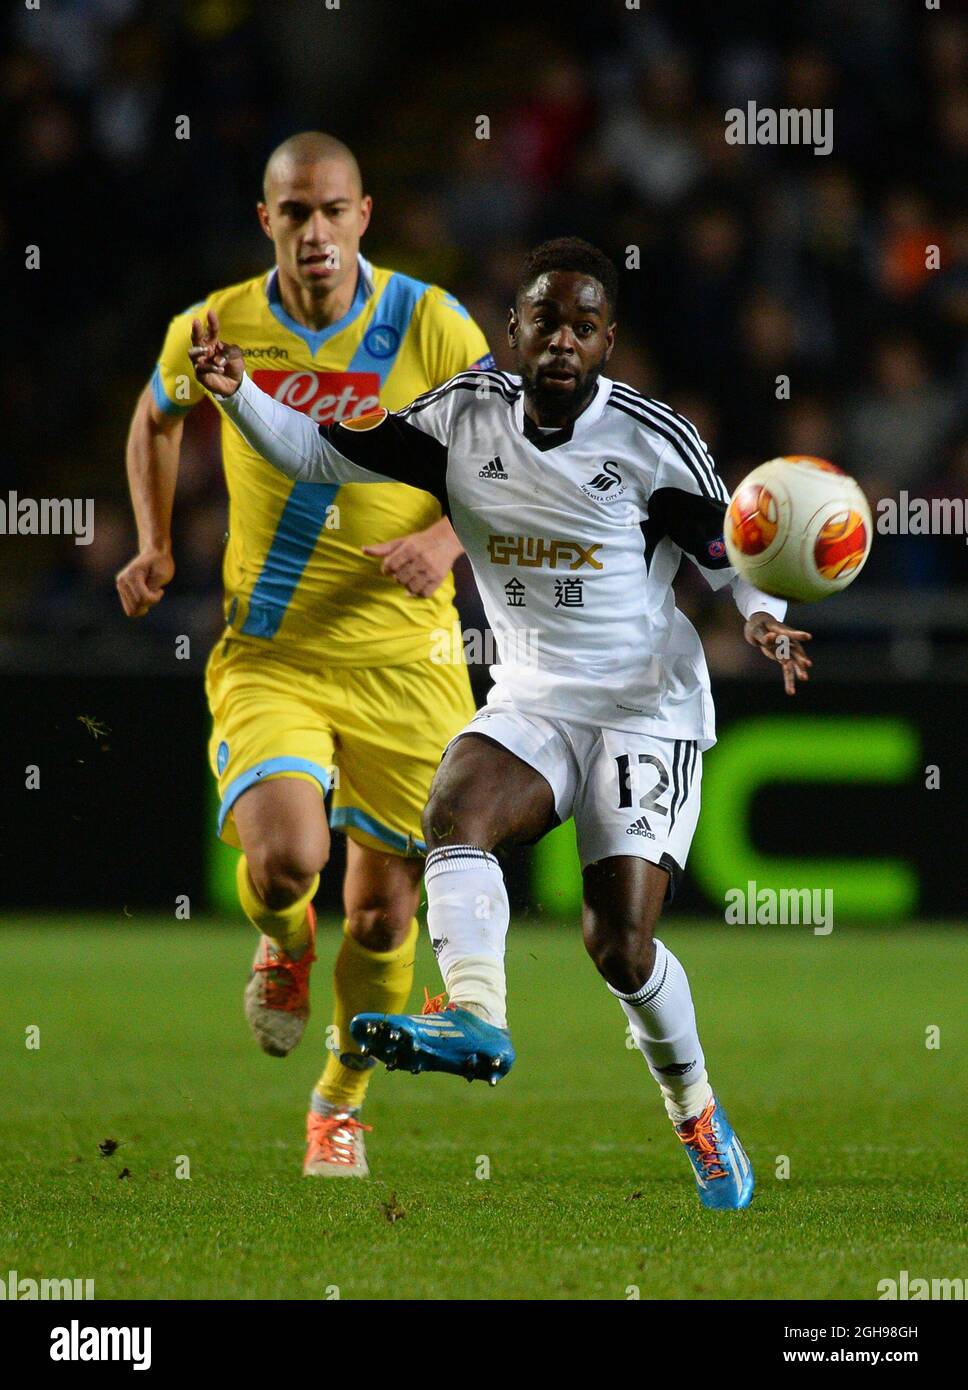 Nathan Dyer of Swansea City holds off Gokhan Inler of Napoli during the UEFA Europa League, round of 32 match between Swansea City and Napoli held at Liberty Stadium in Swansea, Wales on 20th February 2014. Stock Photo